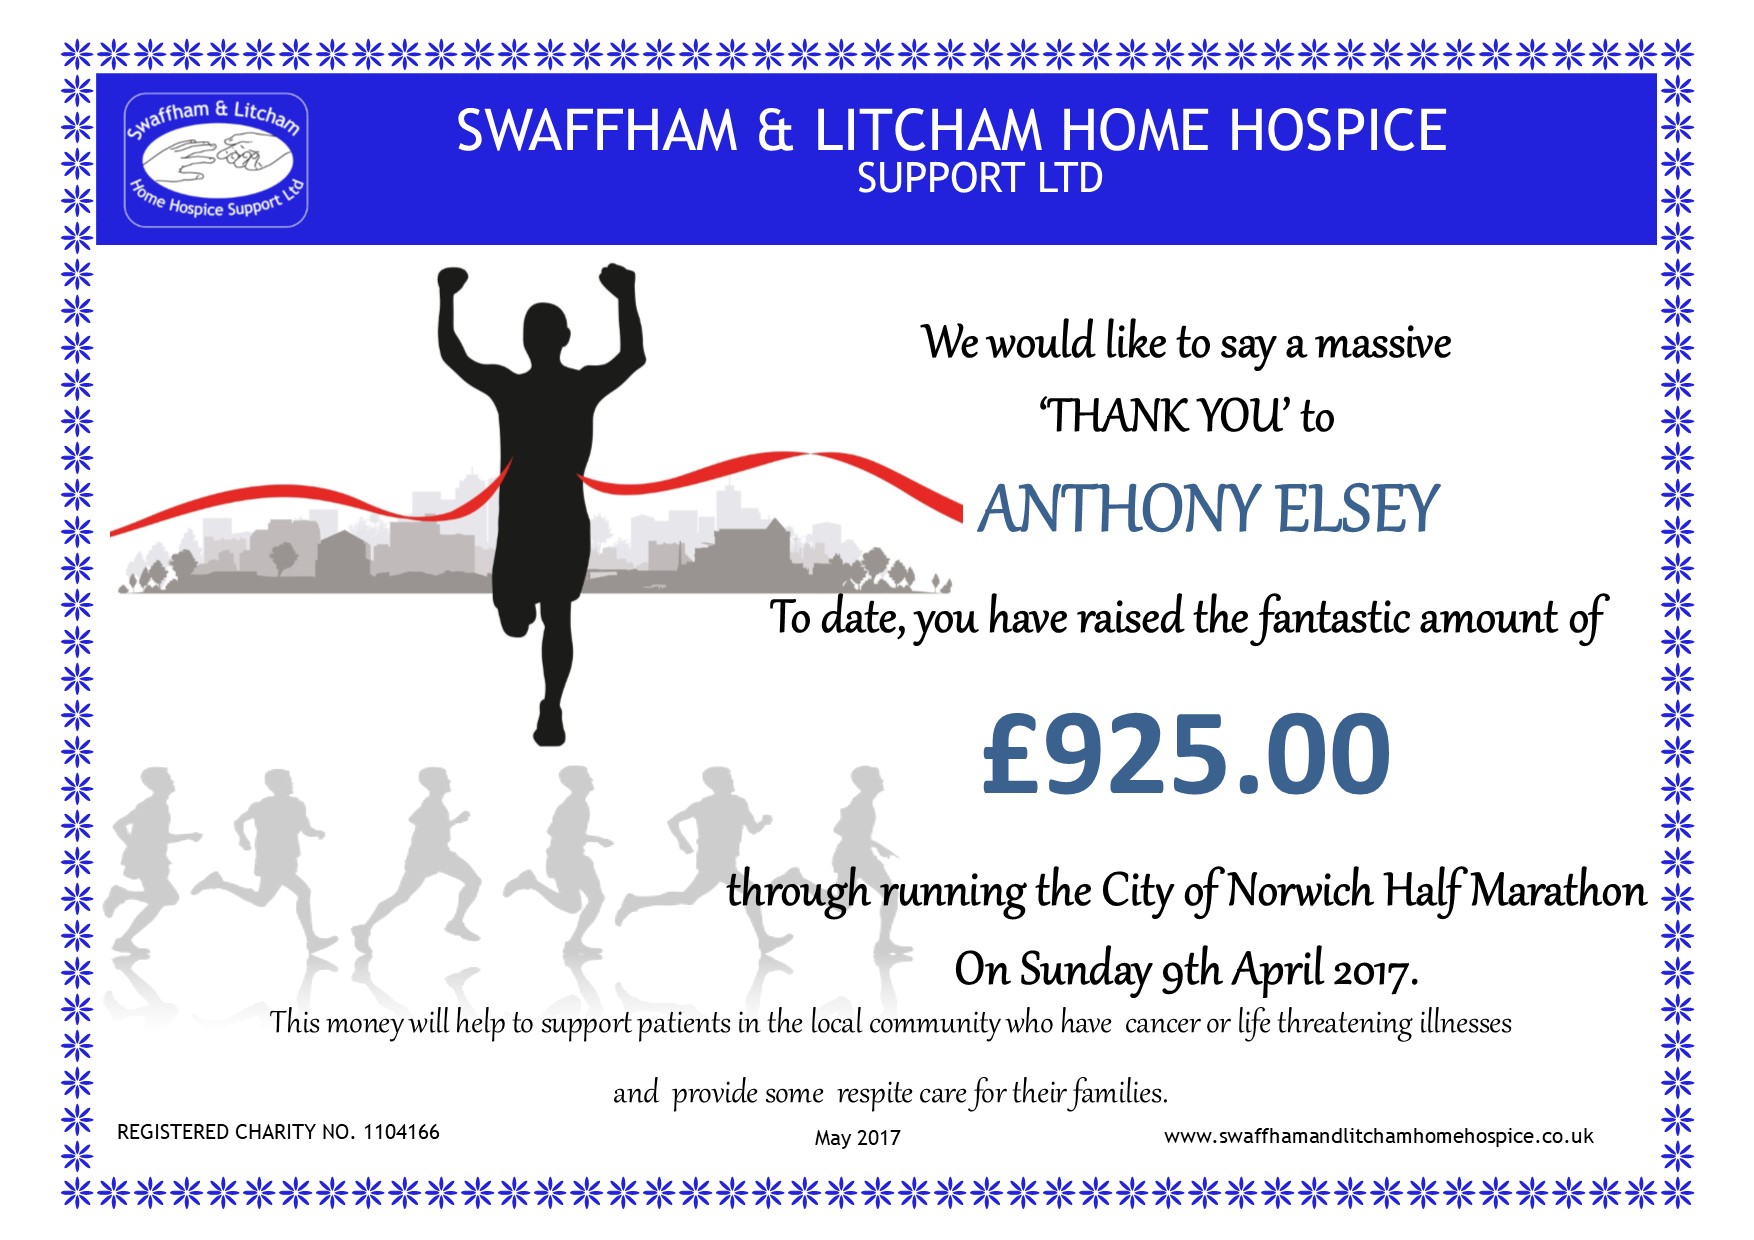 Money raised by Anthony Elsey who ran the Norwich Half Marathon in May 2017